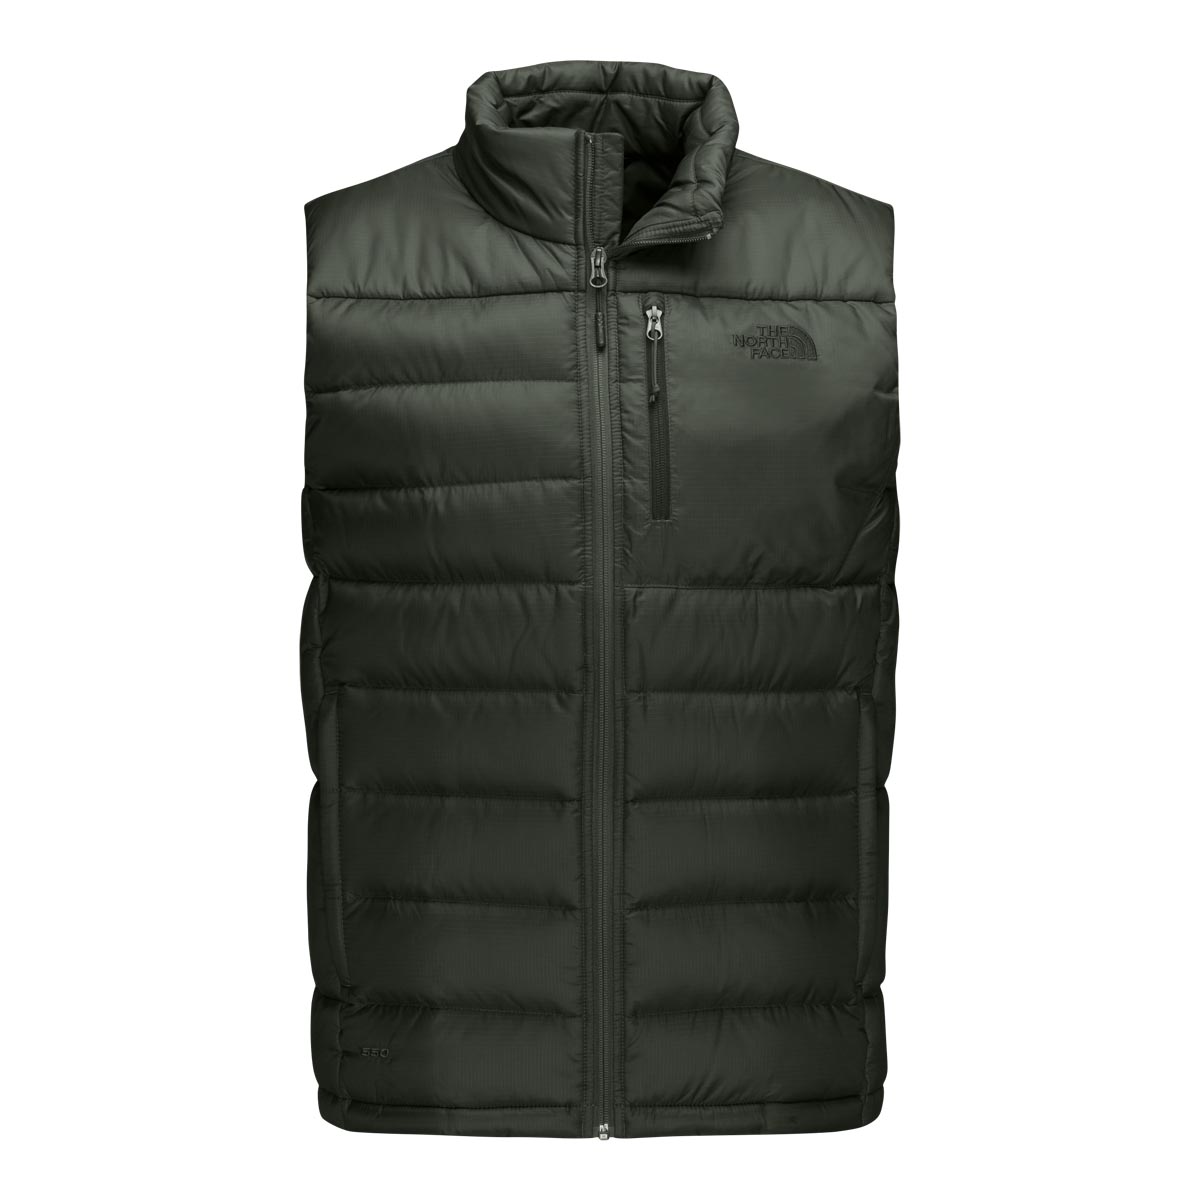 The North Face Men's Aconcagua Vest Discontinued Pricing